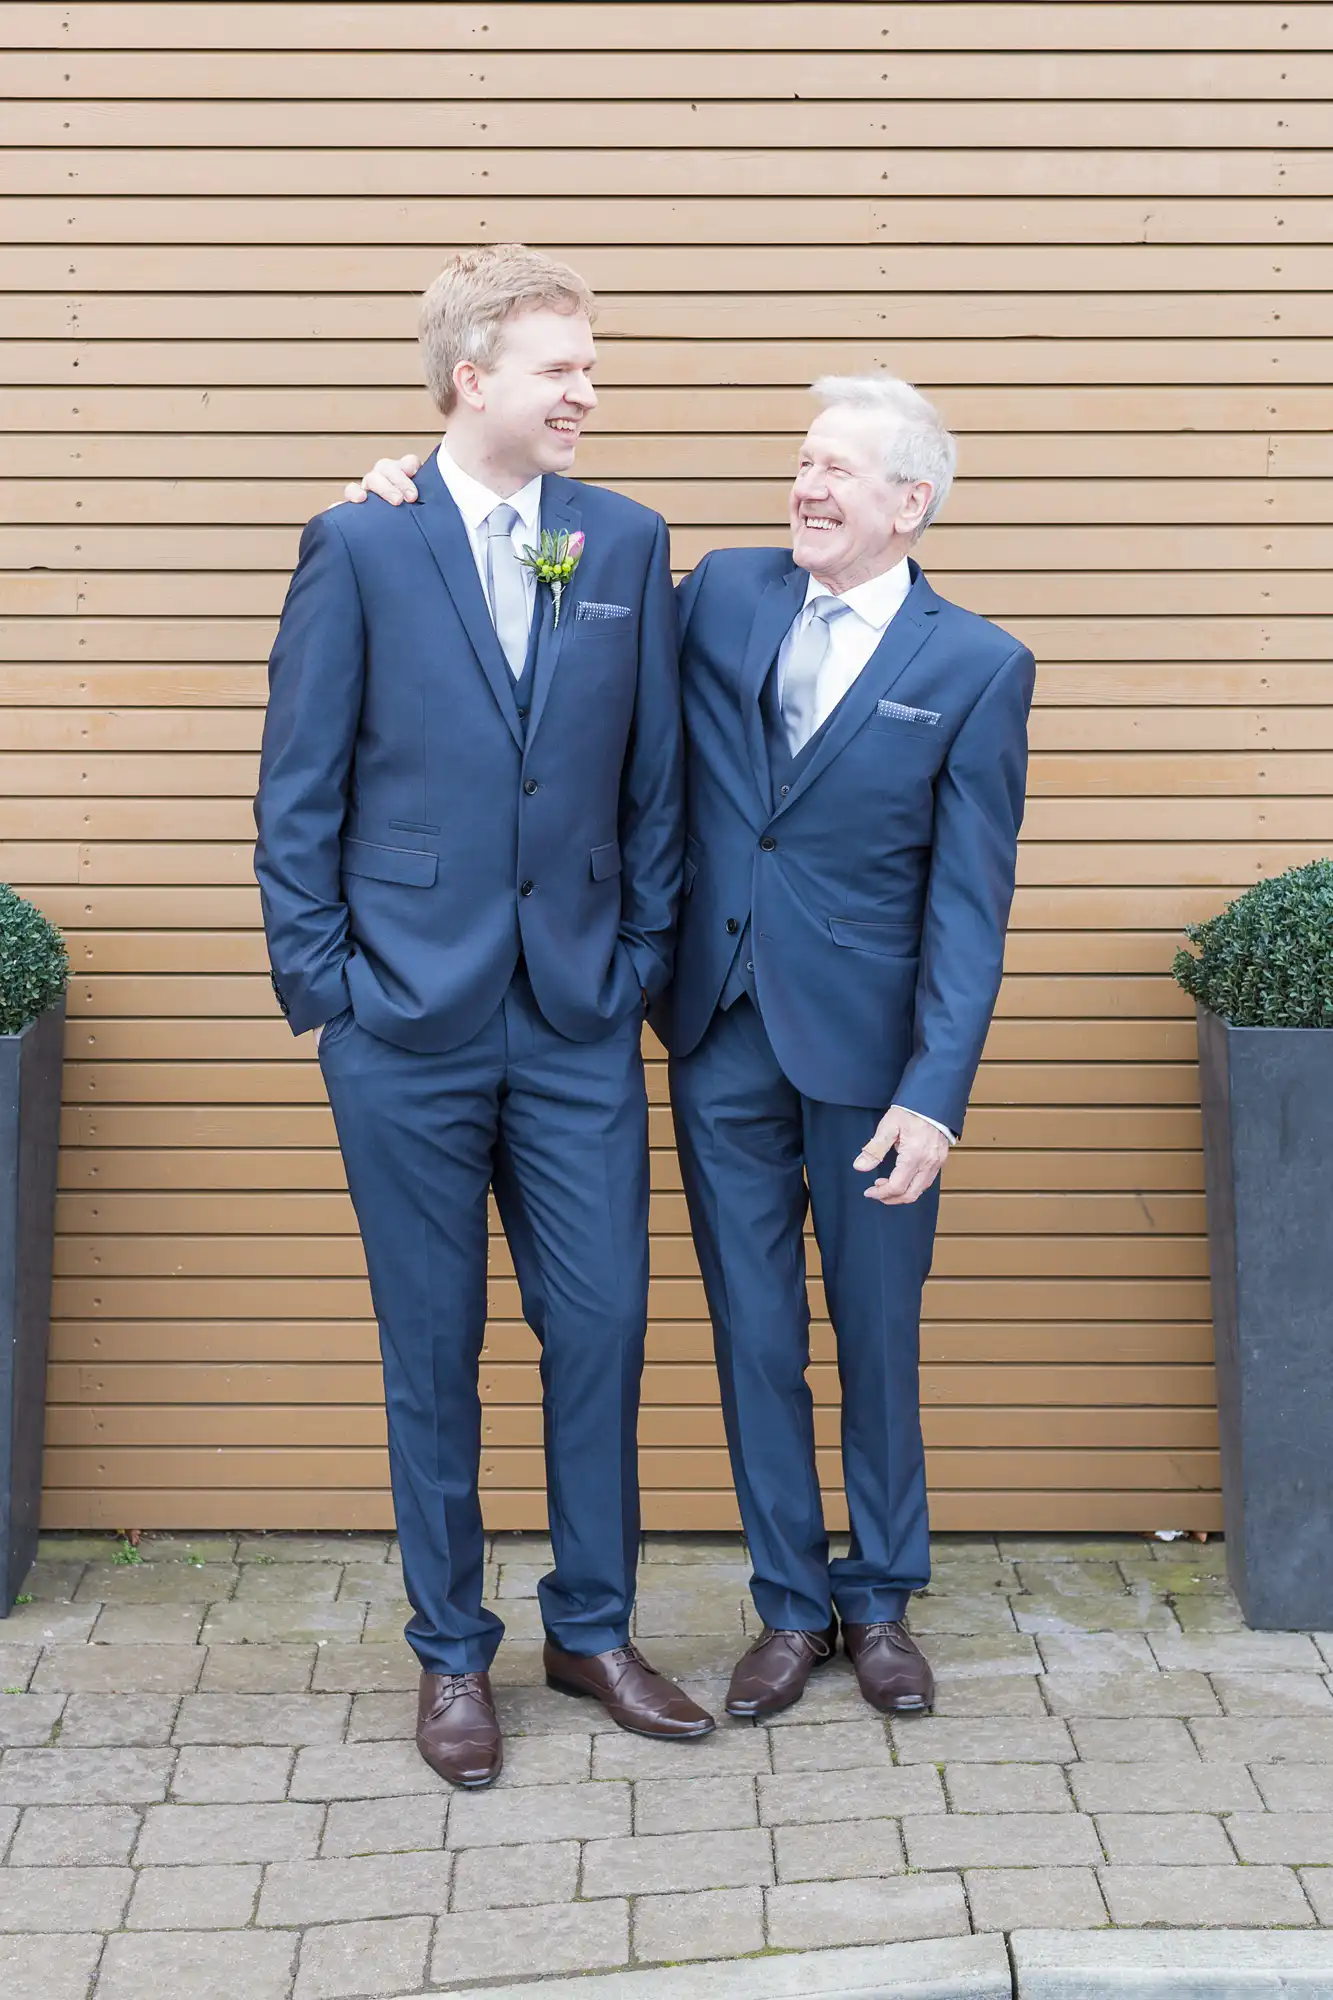 Two men in navy suits smiling at each other, standing against a wooden slat wall, with one man wearing a boutonniere.